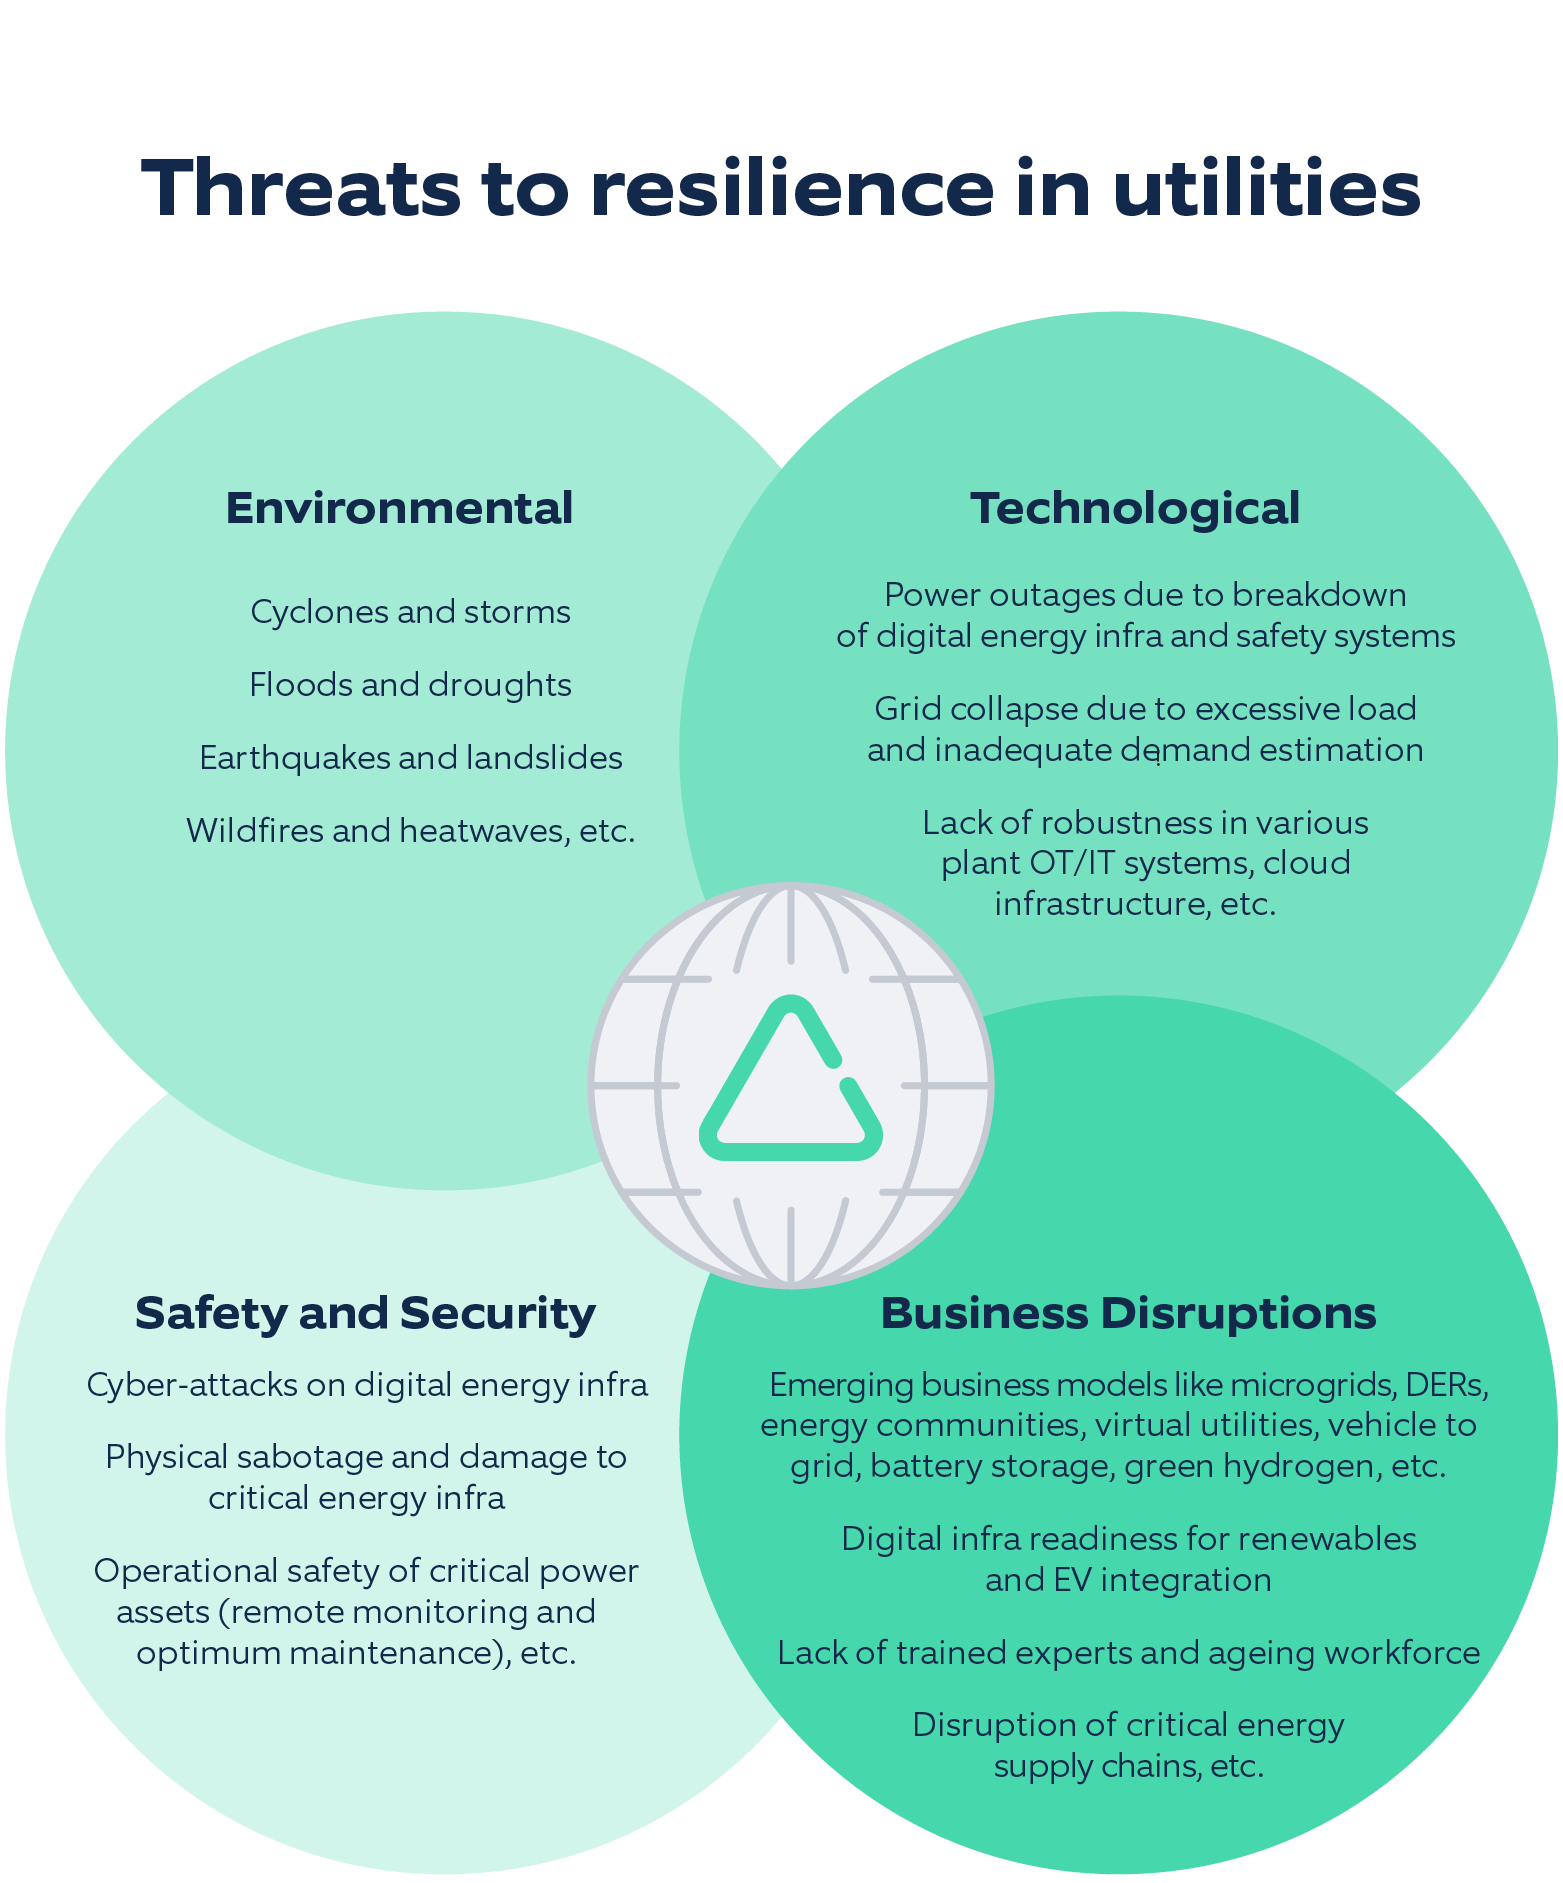 Threats to resilience in power utilities